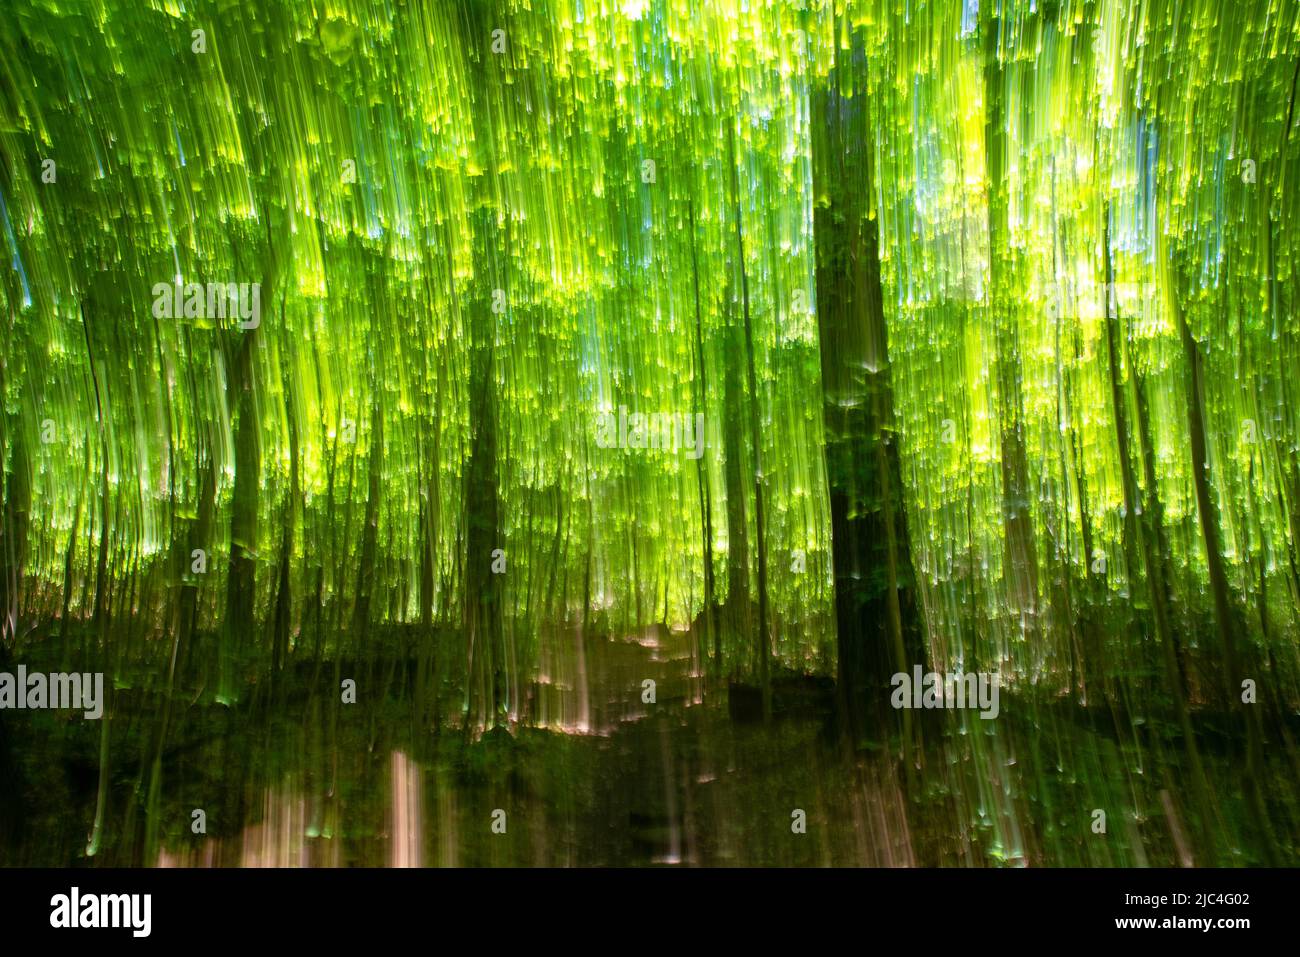 Intentional camera movement blurred image with ethereal, idyllic enchanted forest feel, golden hour sunlight illuiminates the green foliage and dots t Stock Photo